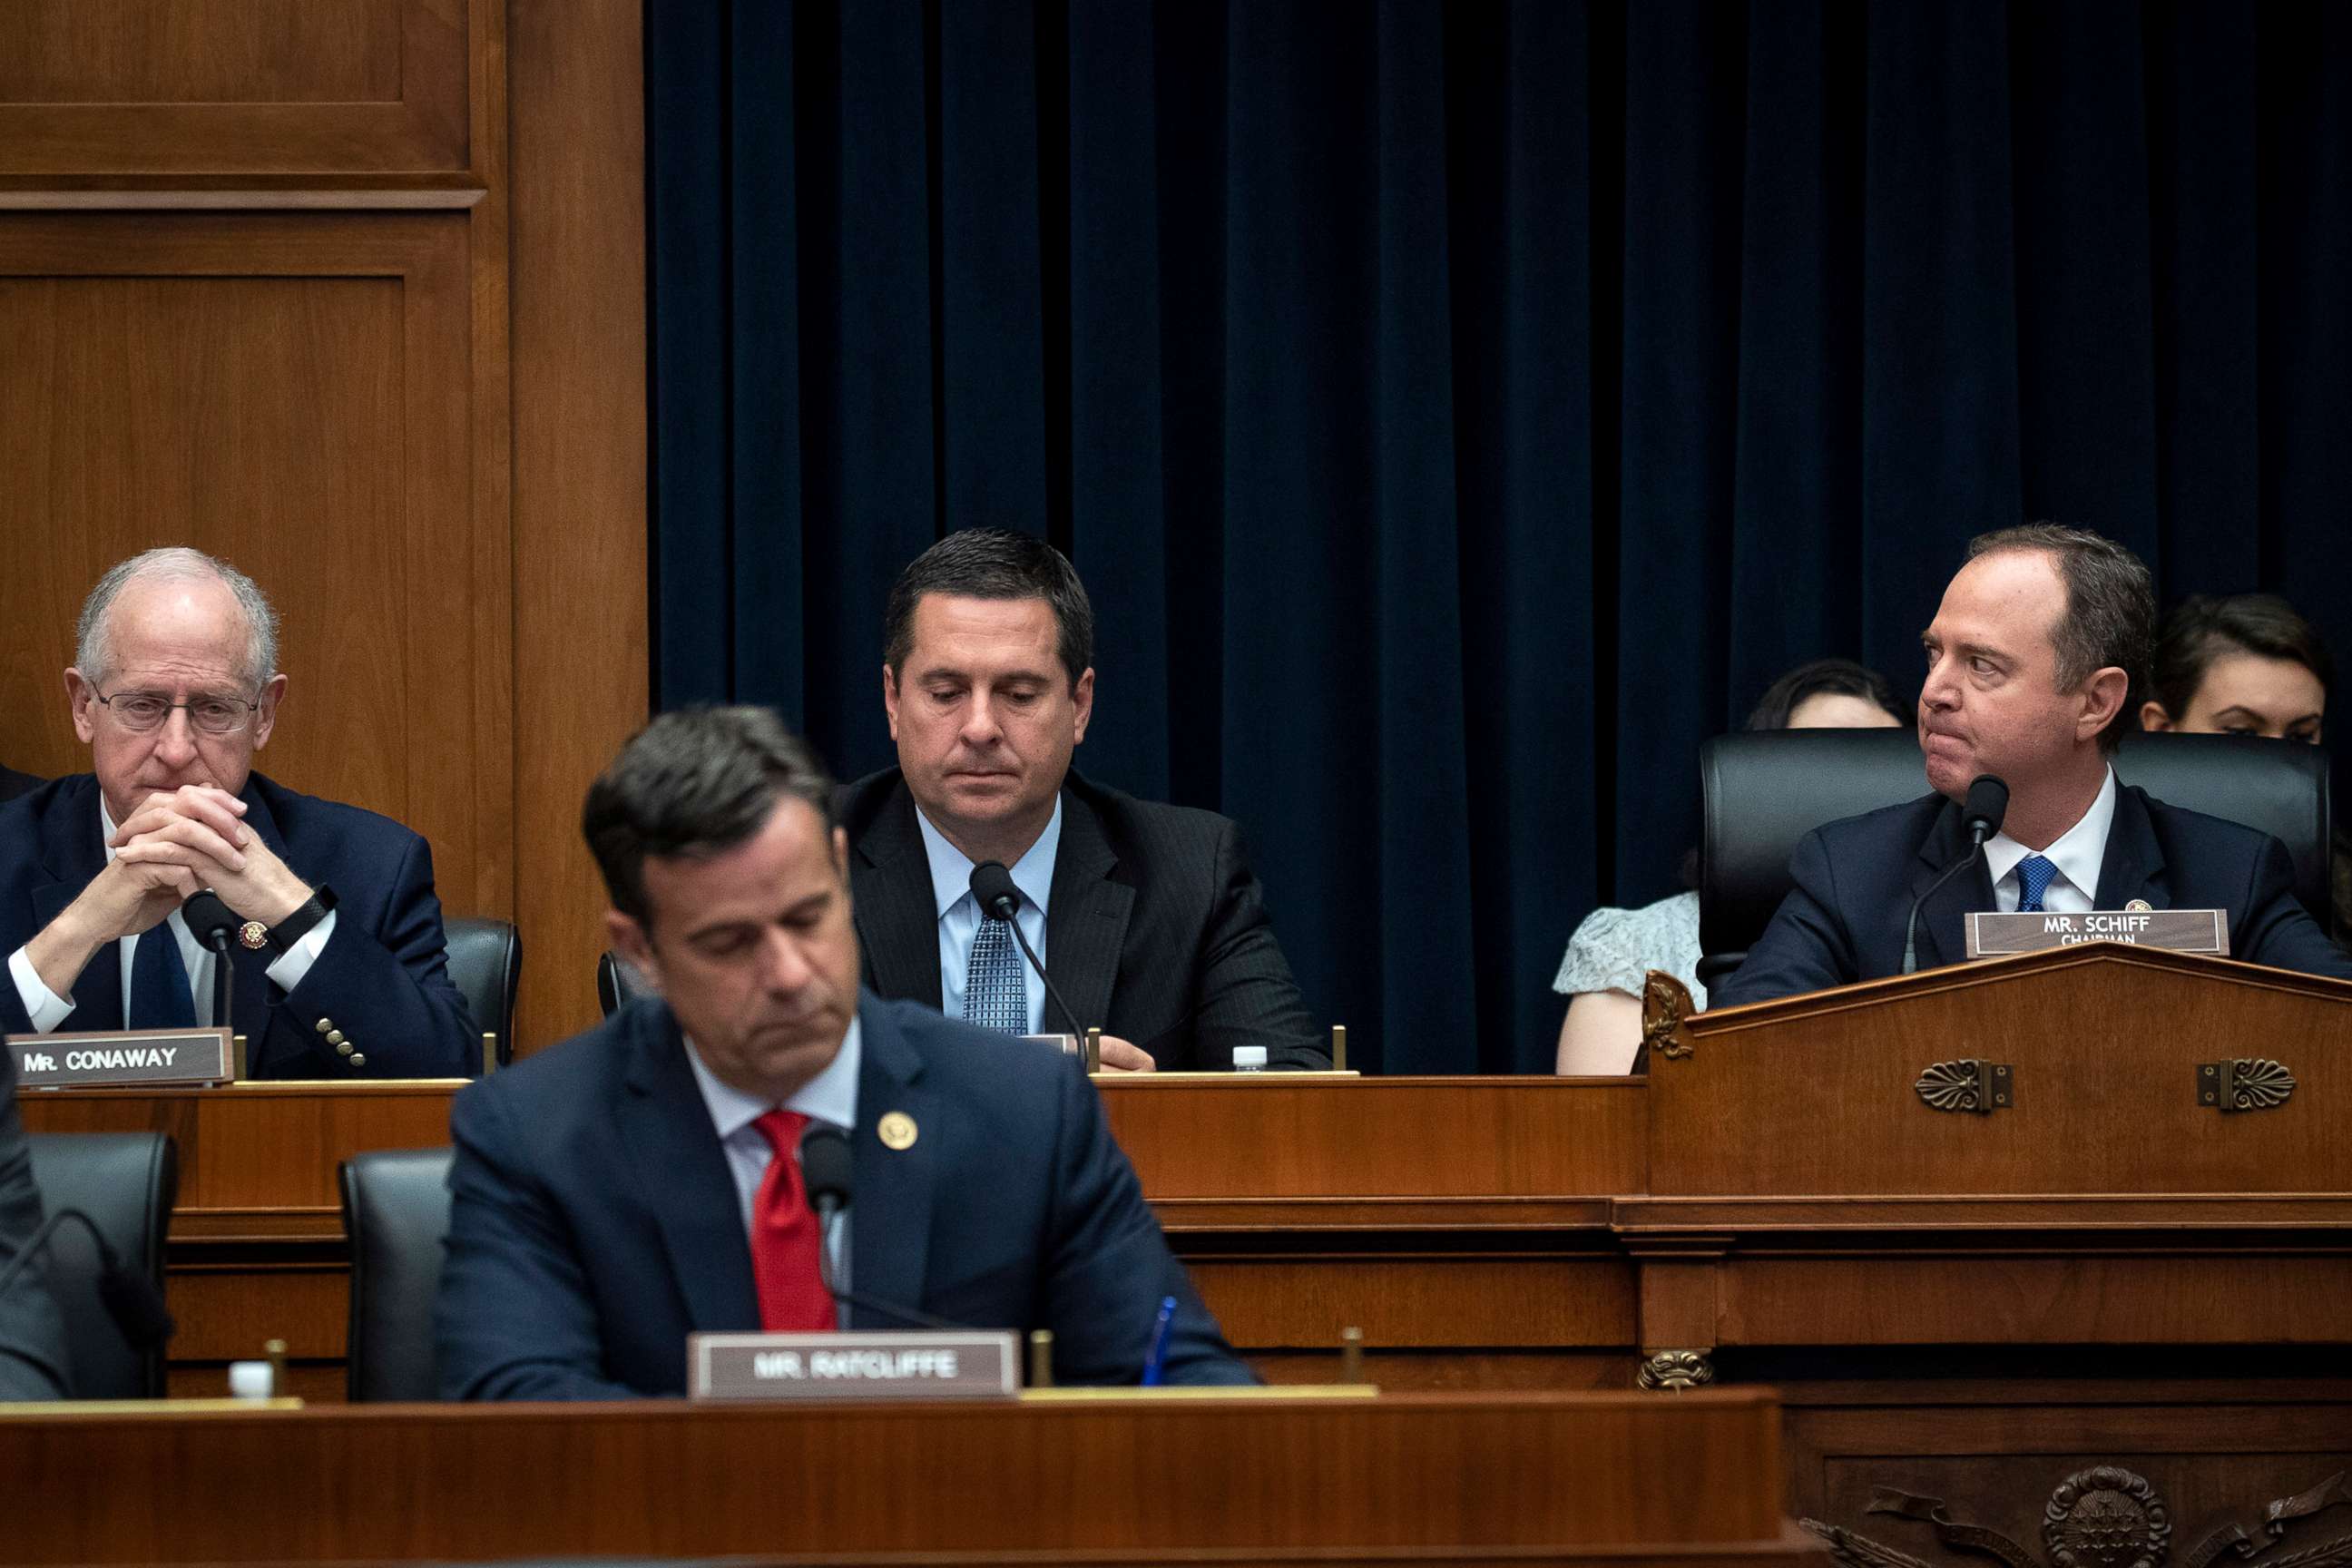 PHOTO: From left, Reps. Mike Conway, John Ratcliffe, House Select Committee on Intelligence ranking member Devin Nunes and committee Chairman Adam Schiff attend a hearing concerning in the Rayburn House Office Building, March 28, 2019 in Washington, D.C. 